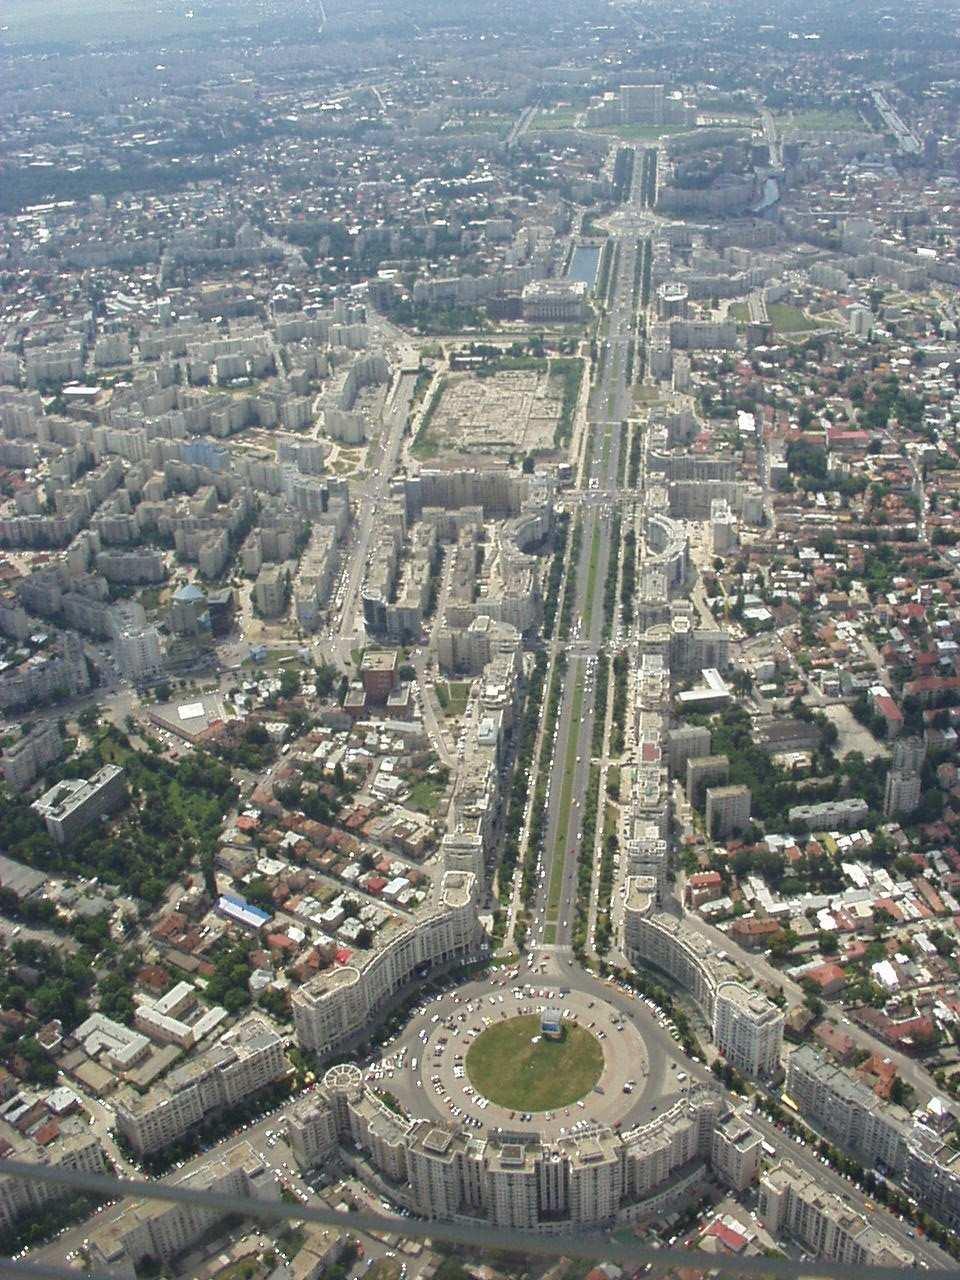 THE CITY OF BUCHAREST HOLDS A TRIPLE STATUT The biggest Urban Agglomeration of the country: holds structural relations with its surroundings; first rank in the national network of cities; 10% of the